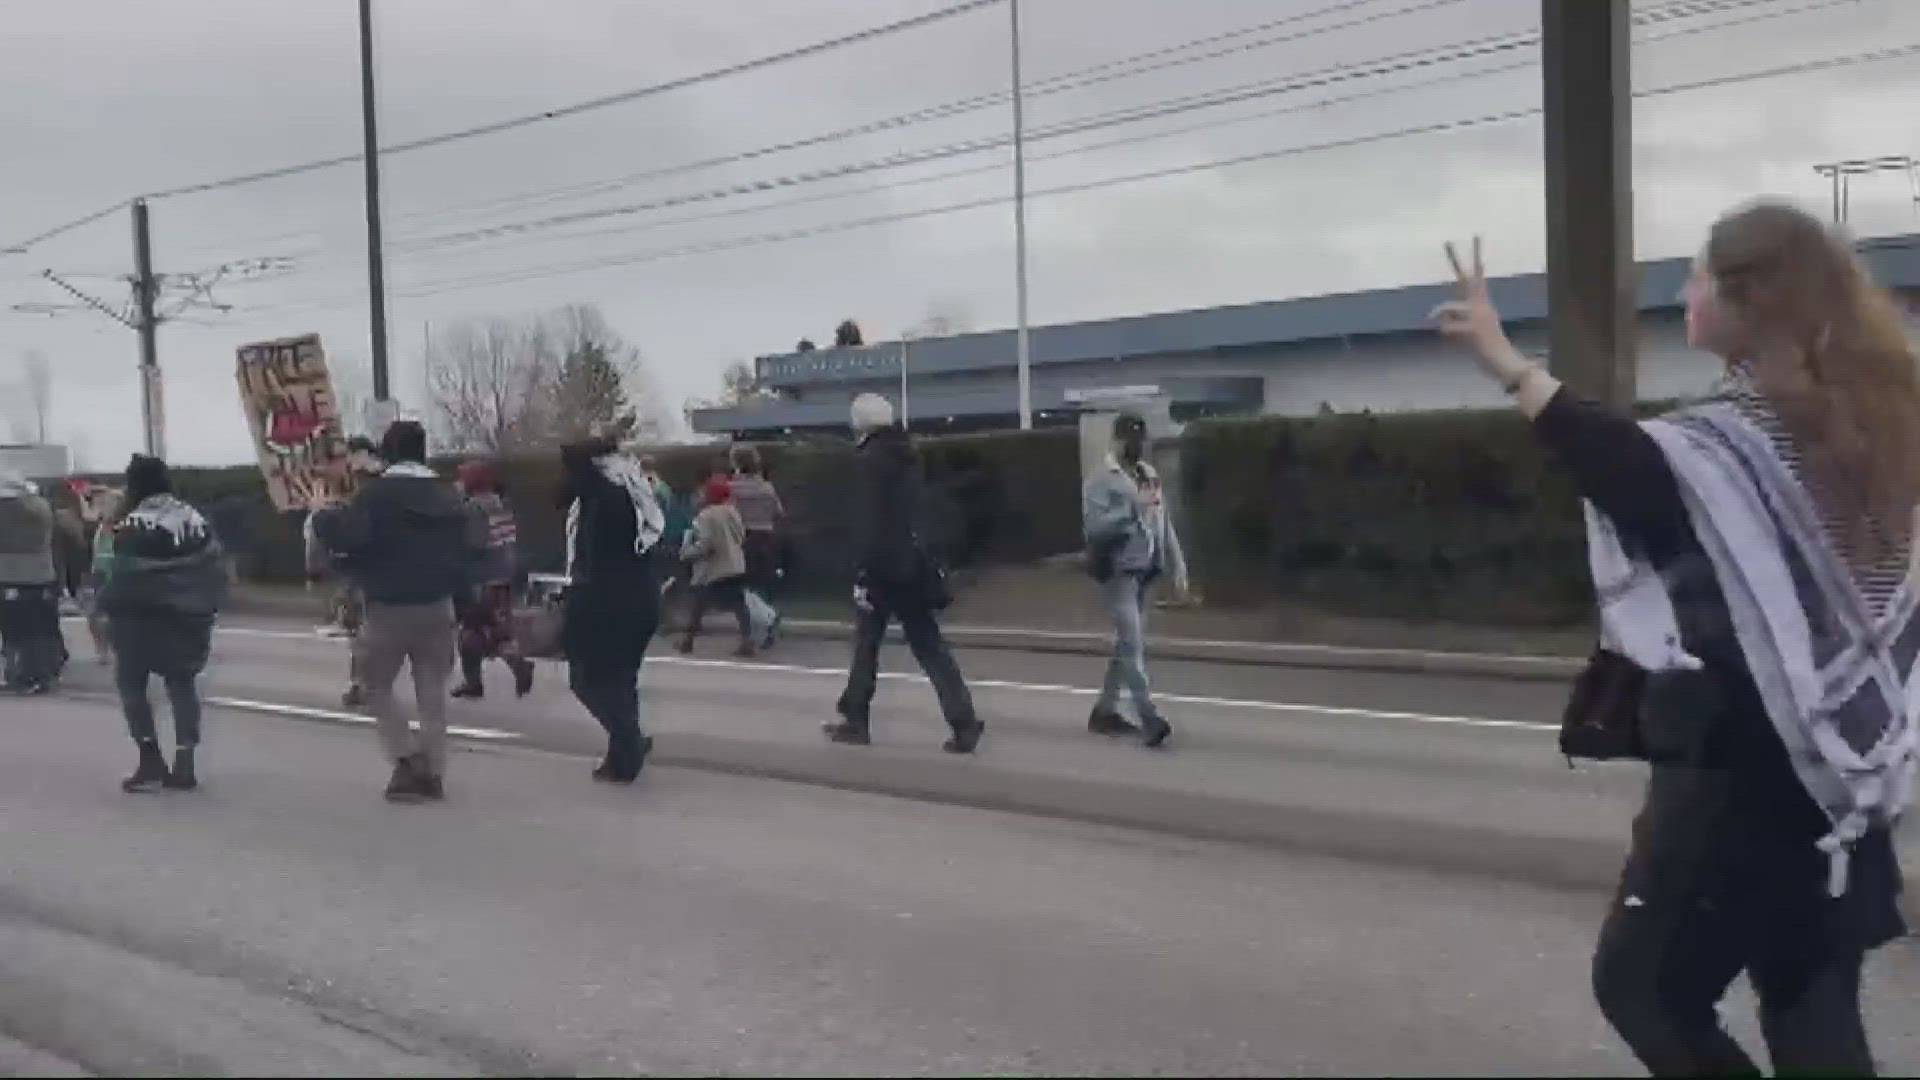 Portland police say the protest took place on Airport Way west of 82nd